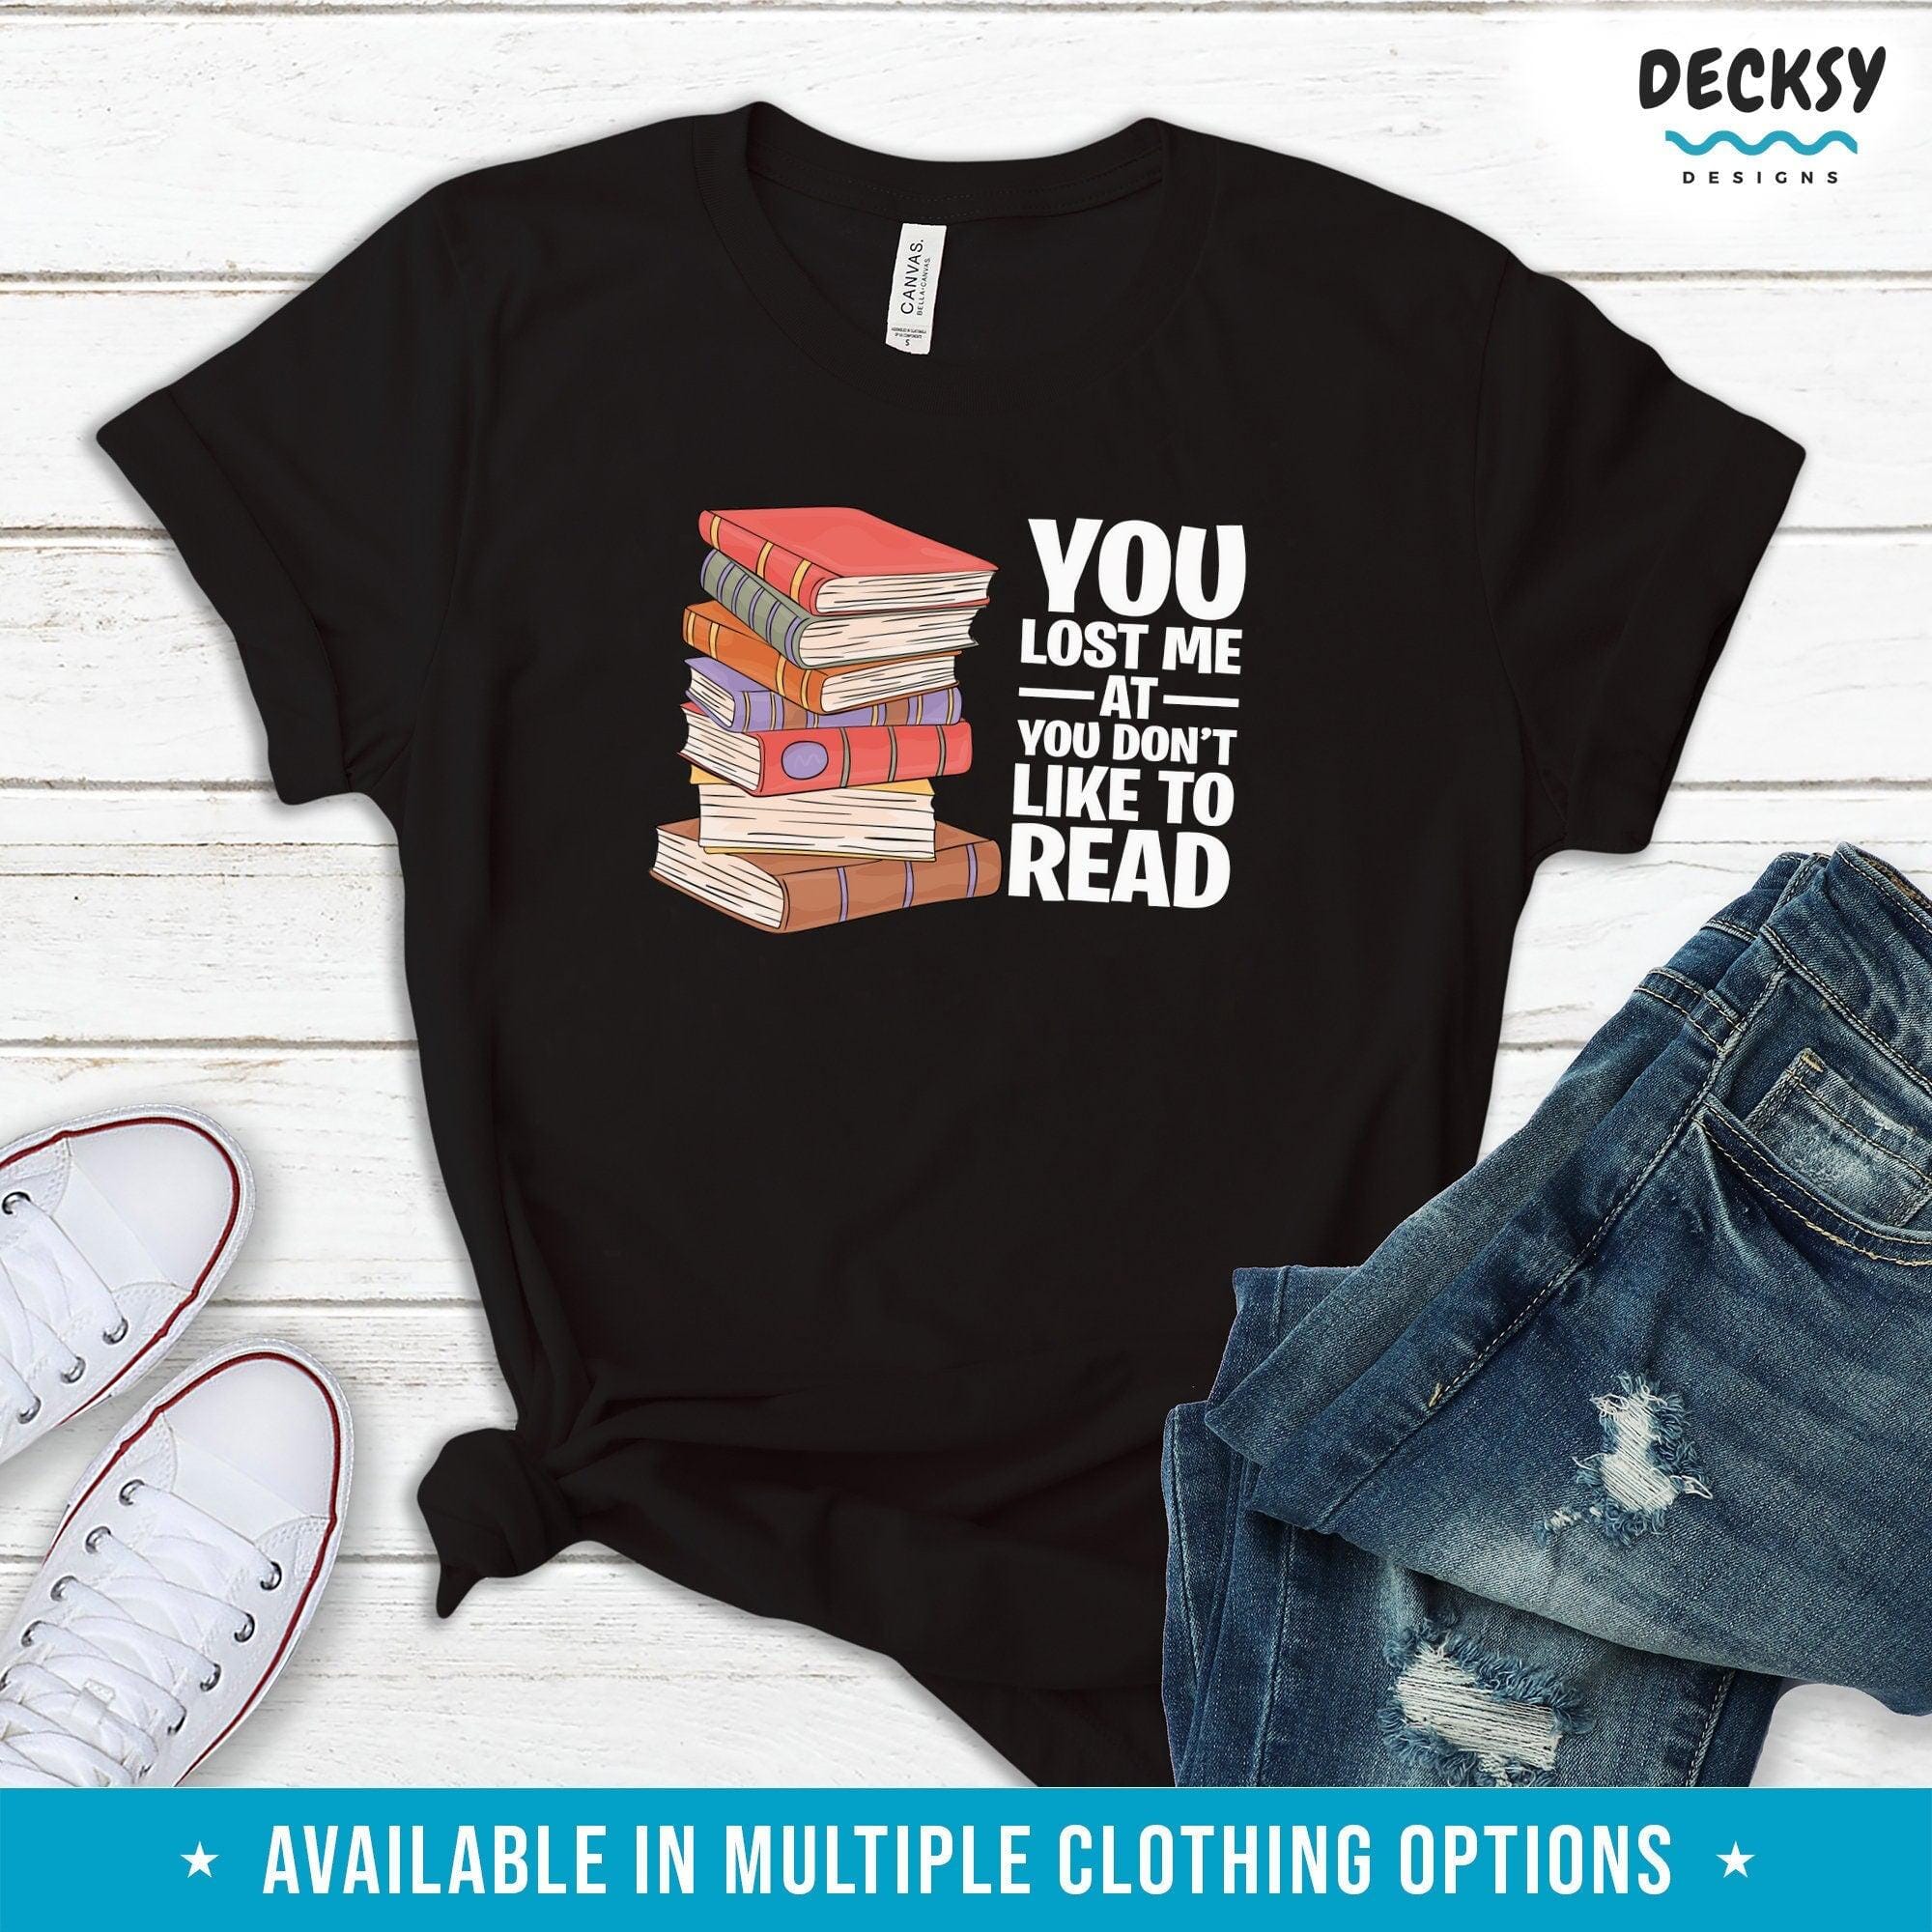 Book Nerd Shirt, Gift For Book Lover-Clothing:Gender-Neutral Adult Clothing:Tops & Tees:T-shirts:Graphic Tees-DecksyDesigns